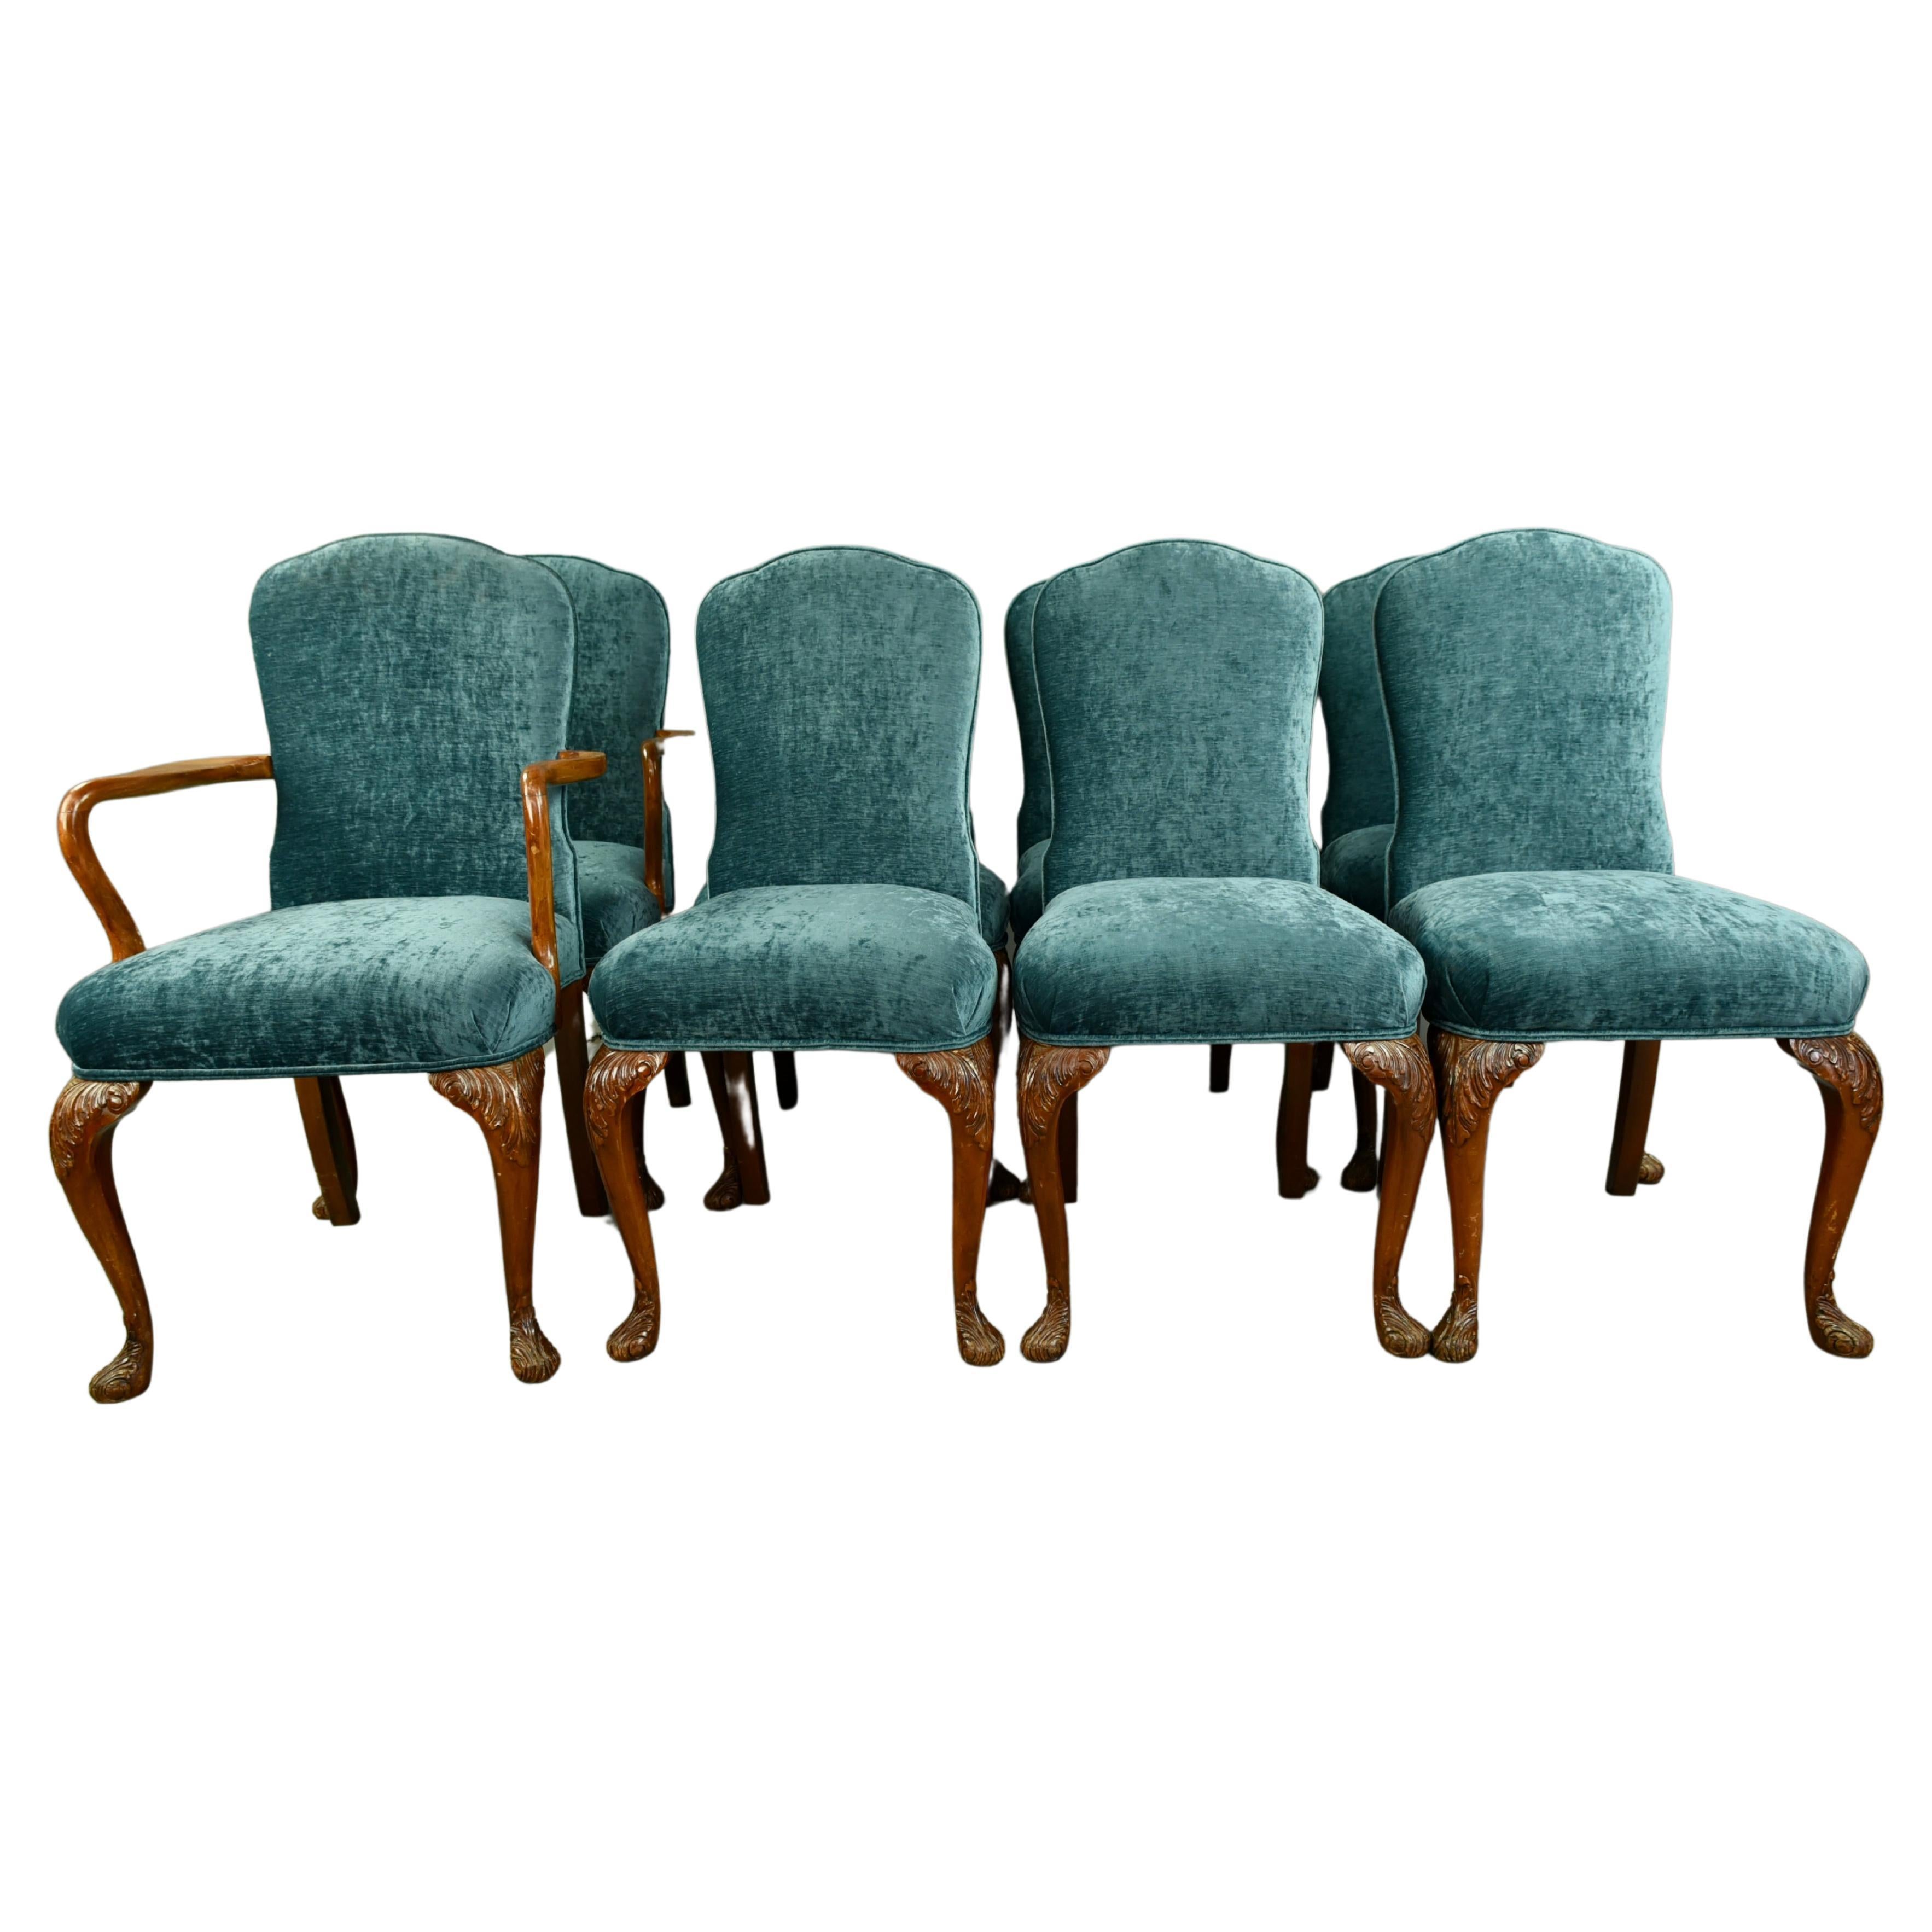 Set of eight walnut Queen Anne style dining chairs by Epstein 